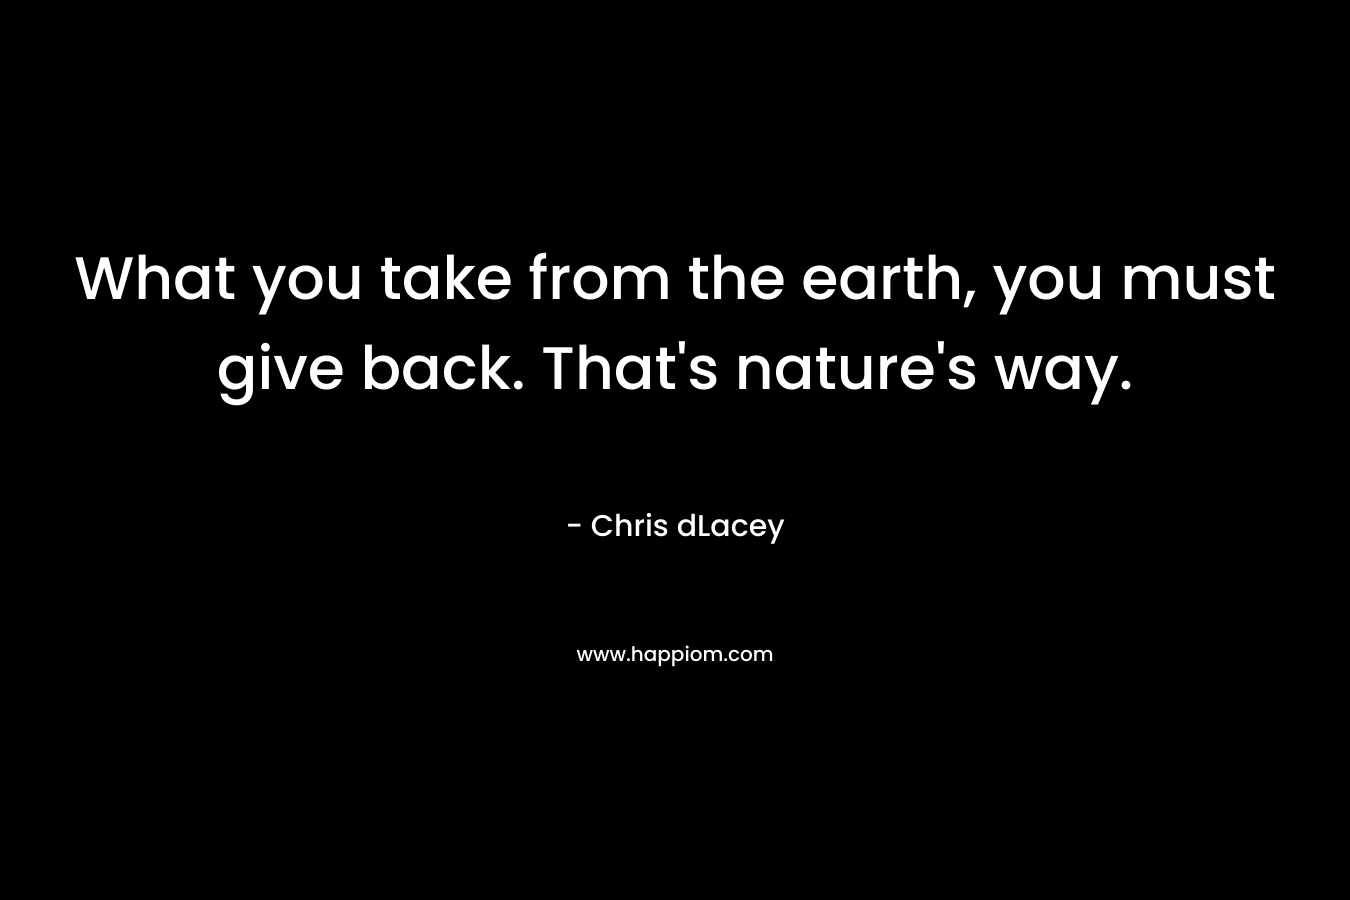 What you take from the earth, you must give back. That’s nature’s way. – Chris dLacey